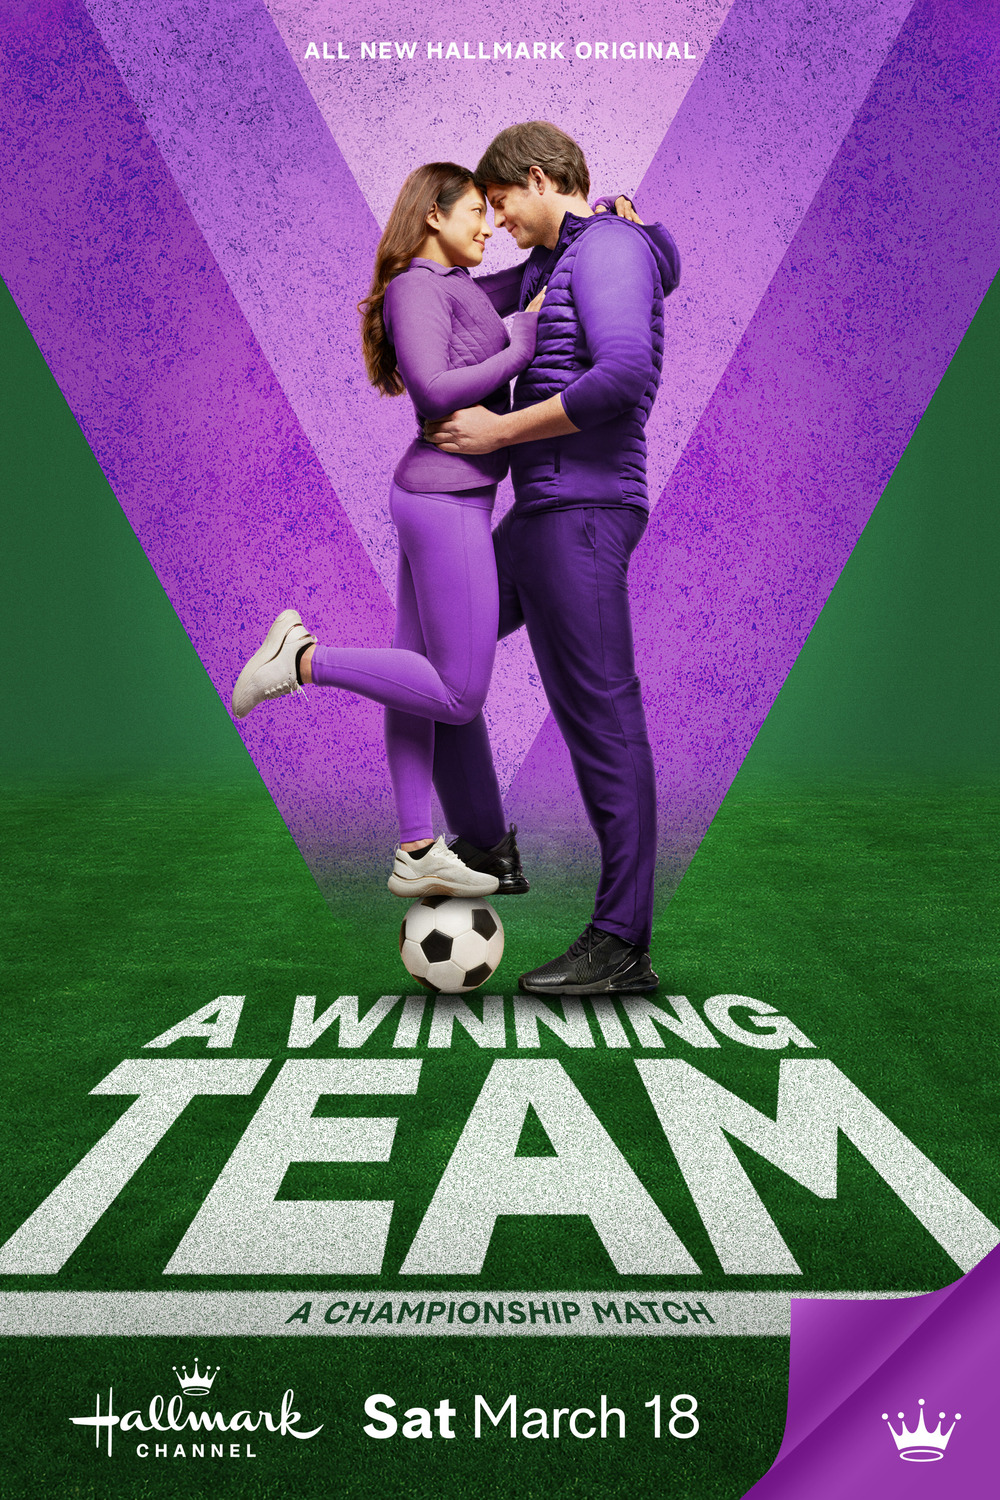 Extra Large Movie Poster Image for Winning Team 